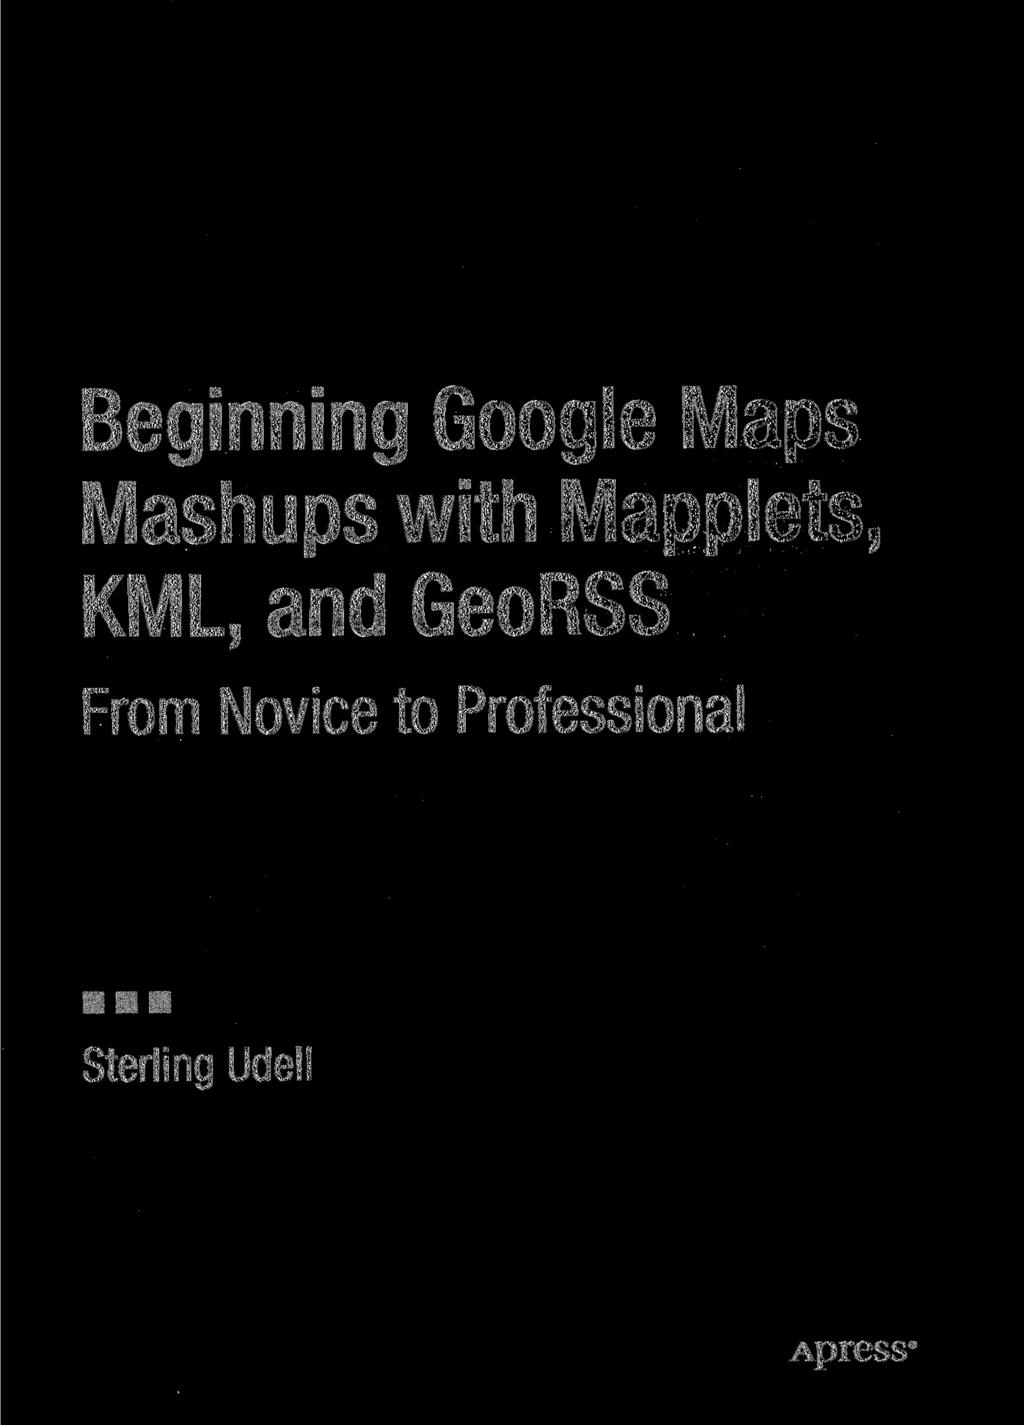 Beginning Google Maps Mashups with Mapplets, KML, and